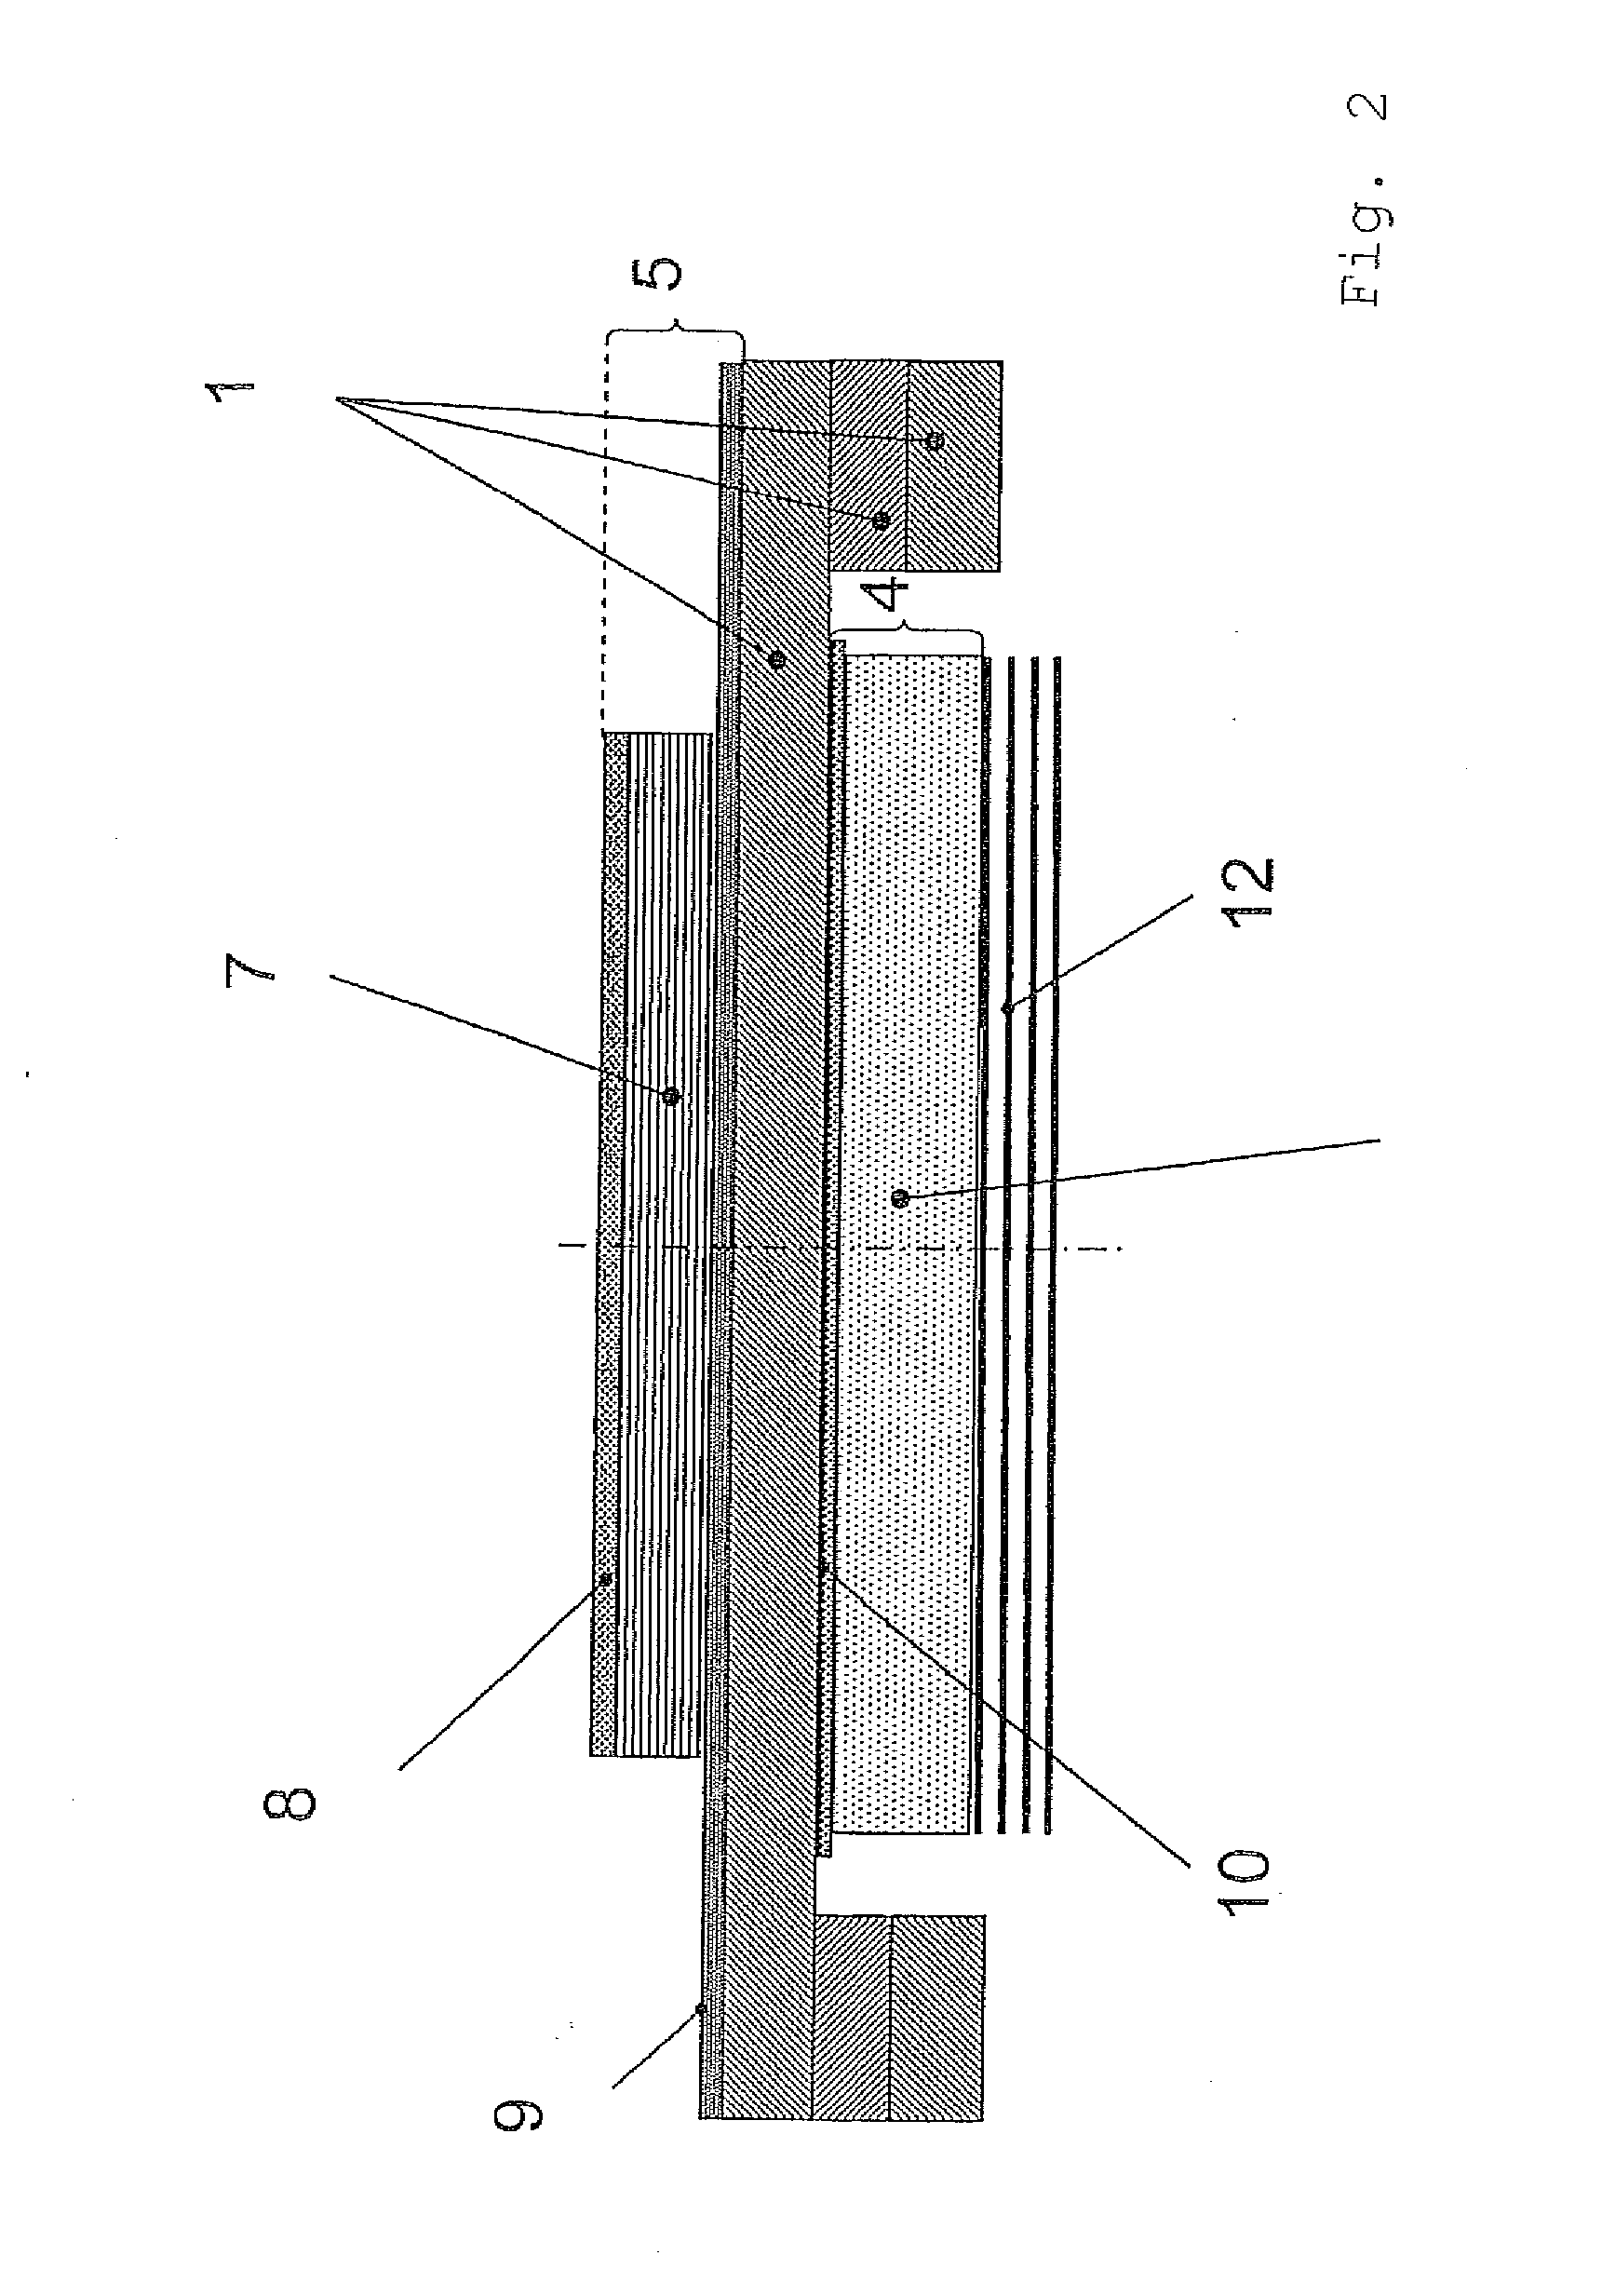 Adaptive deformable mirror for compensation of defects of a wavefront